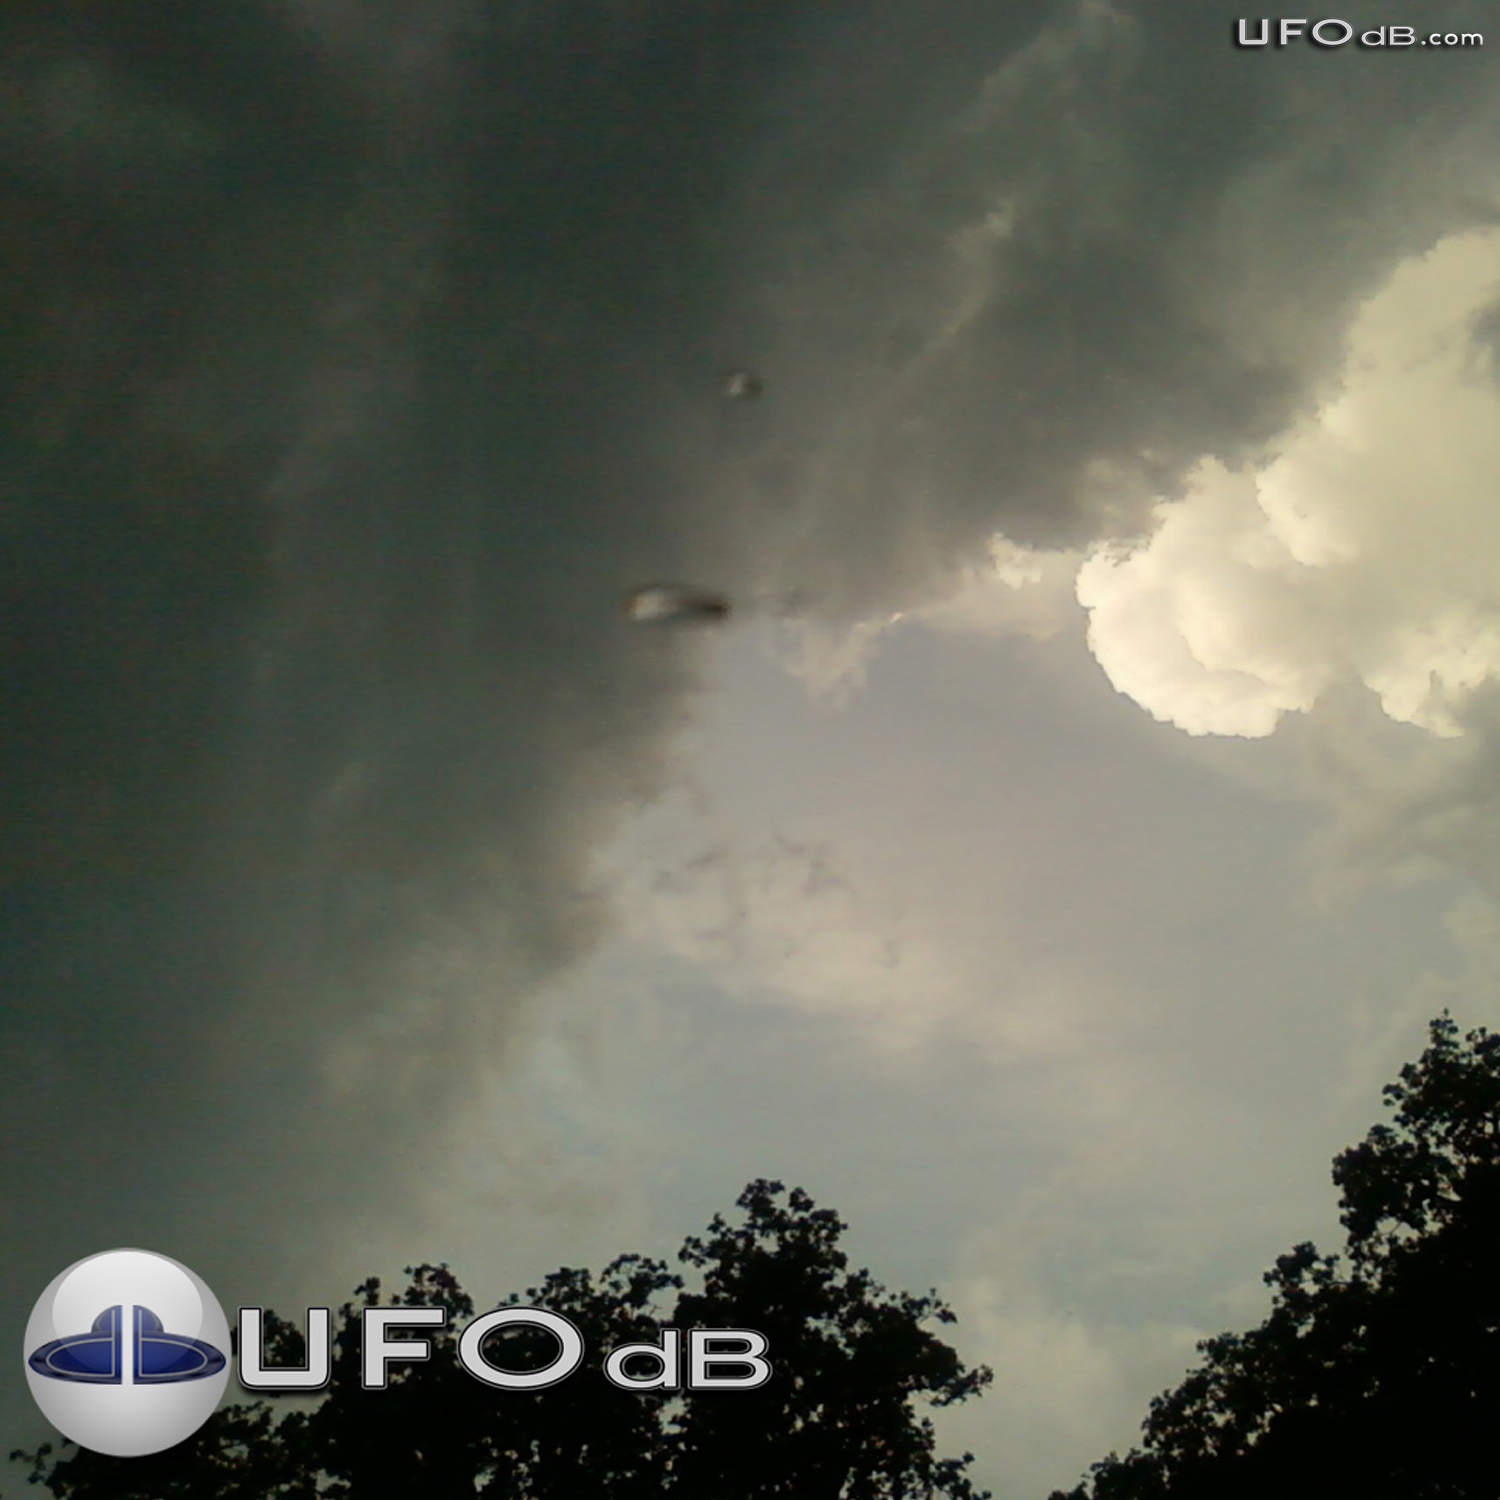 Fort Worth Texas Storm Picture reveals UFOs near clouds | May 24 2011 UFO Picture #343-2